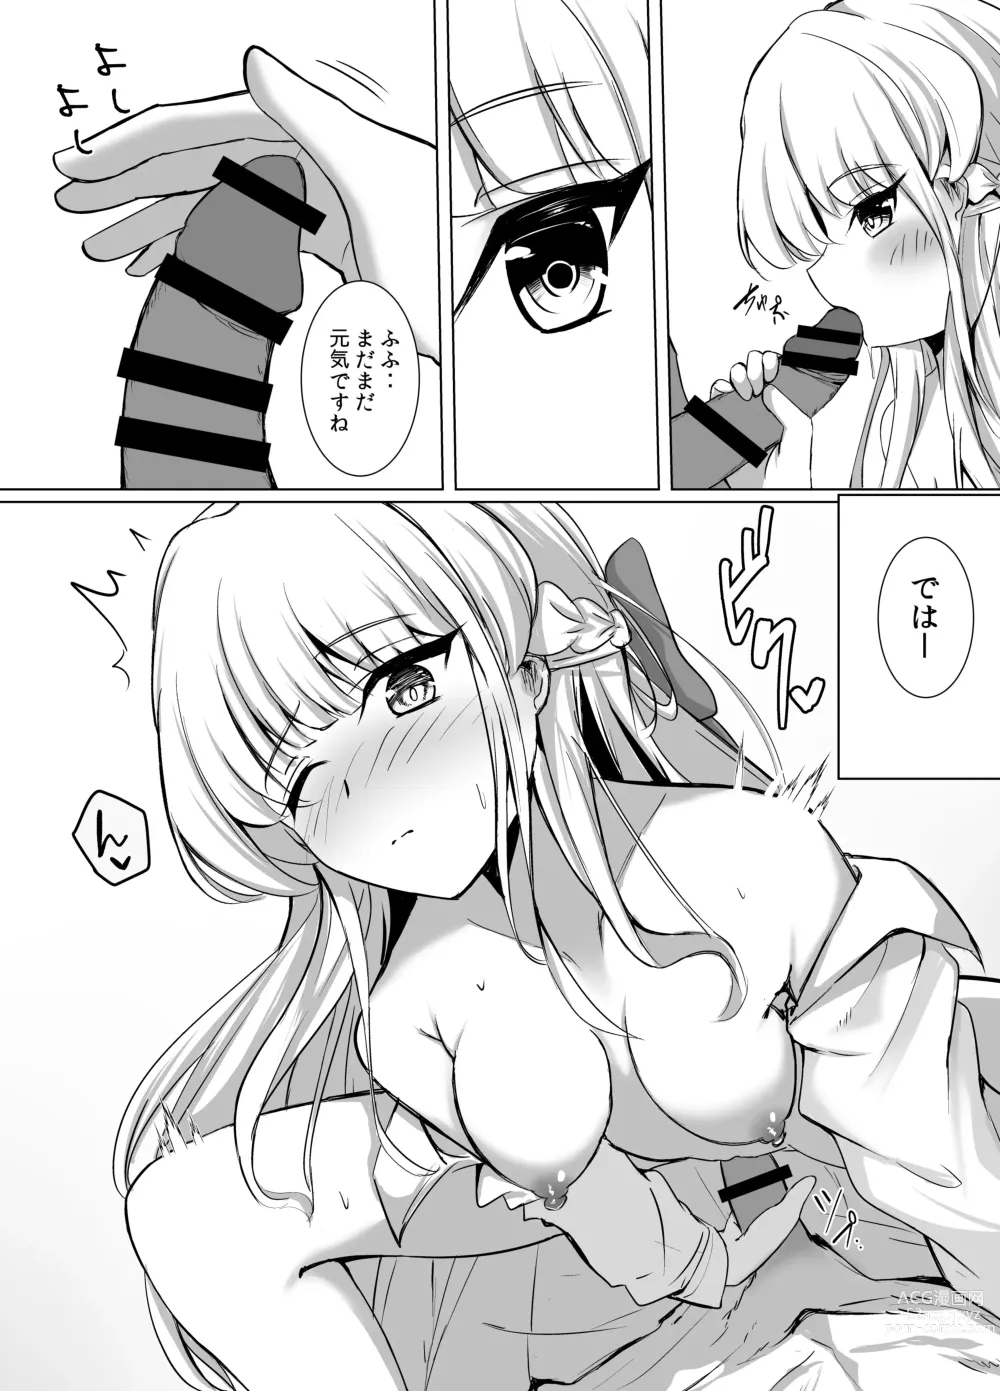 Page 6 of doujinshi Toki Early Afternoon